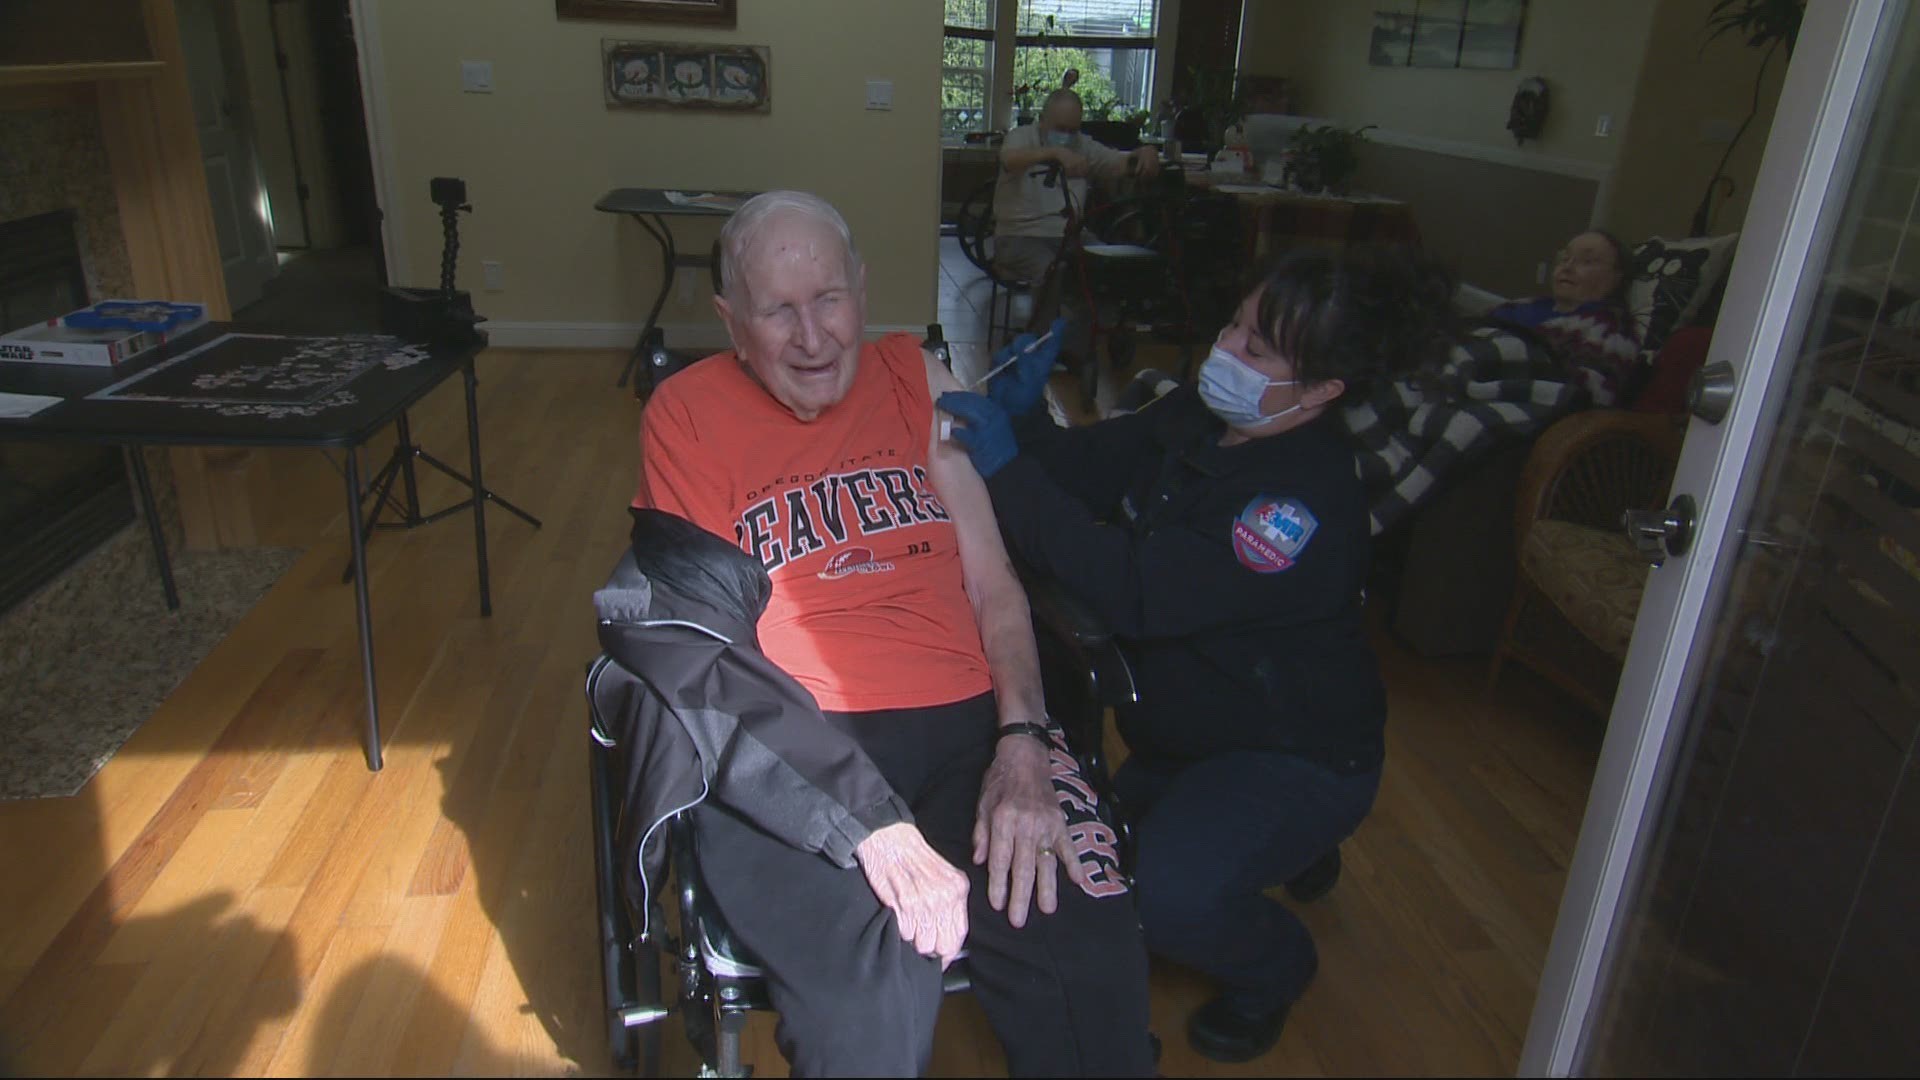 Thousands of Oregonians at care homes had yet to receive a shot. After a month or reporting on the topic, Cristin Severance has some good news.